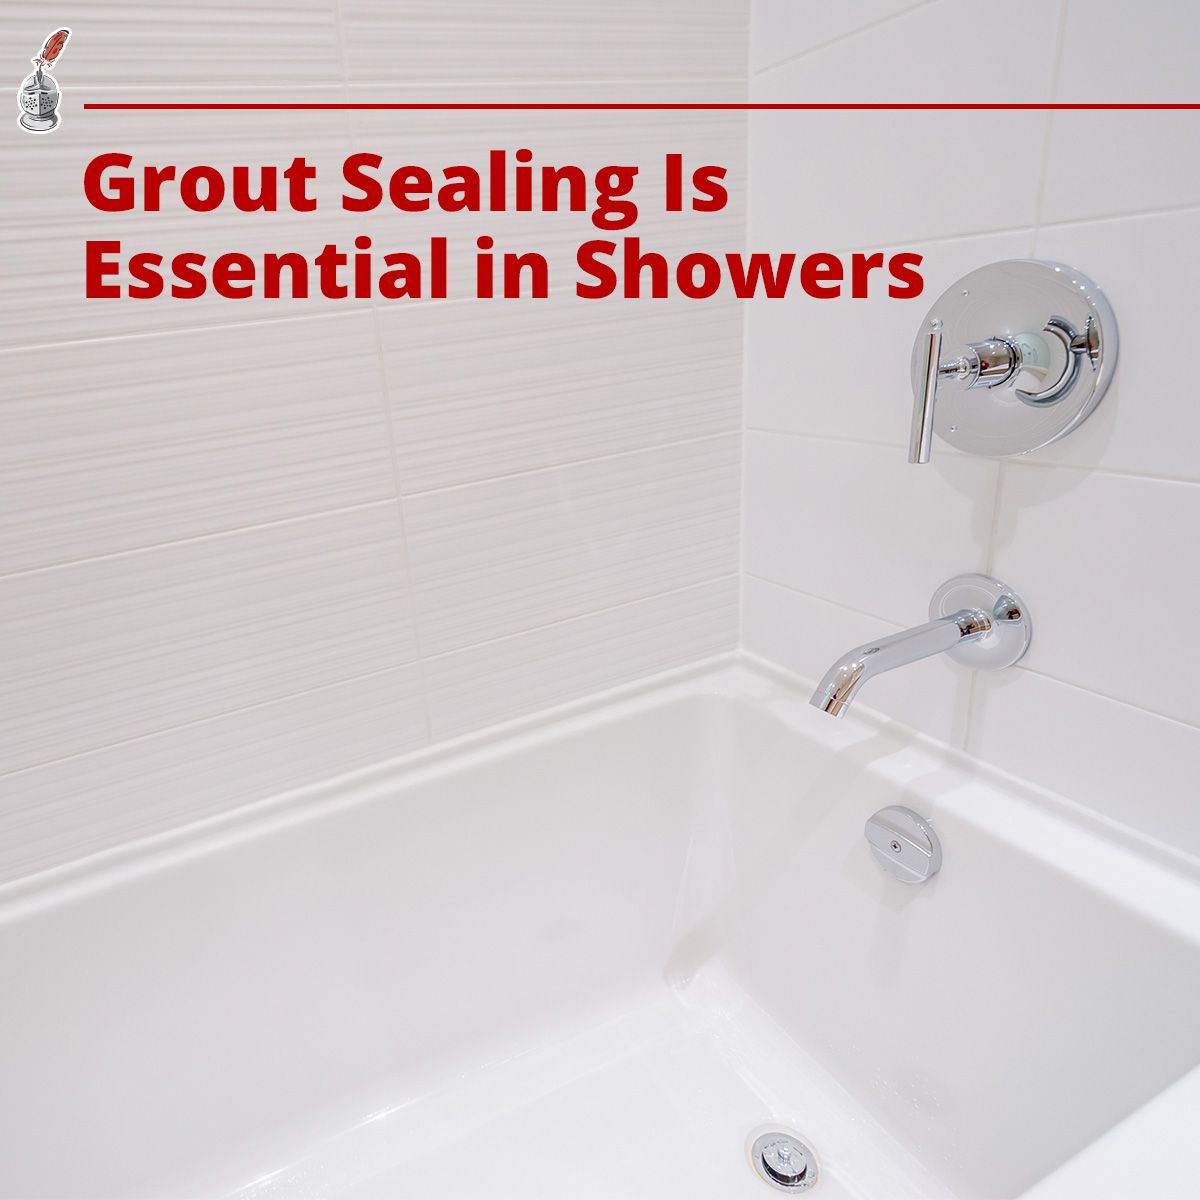 Grout Sealing Is Essential in Showers